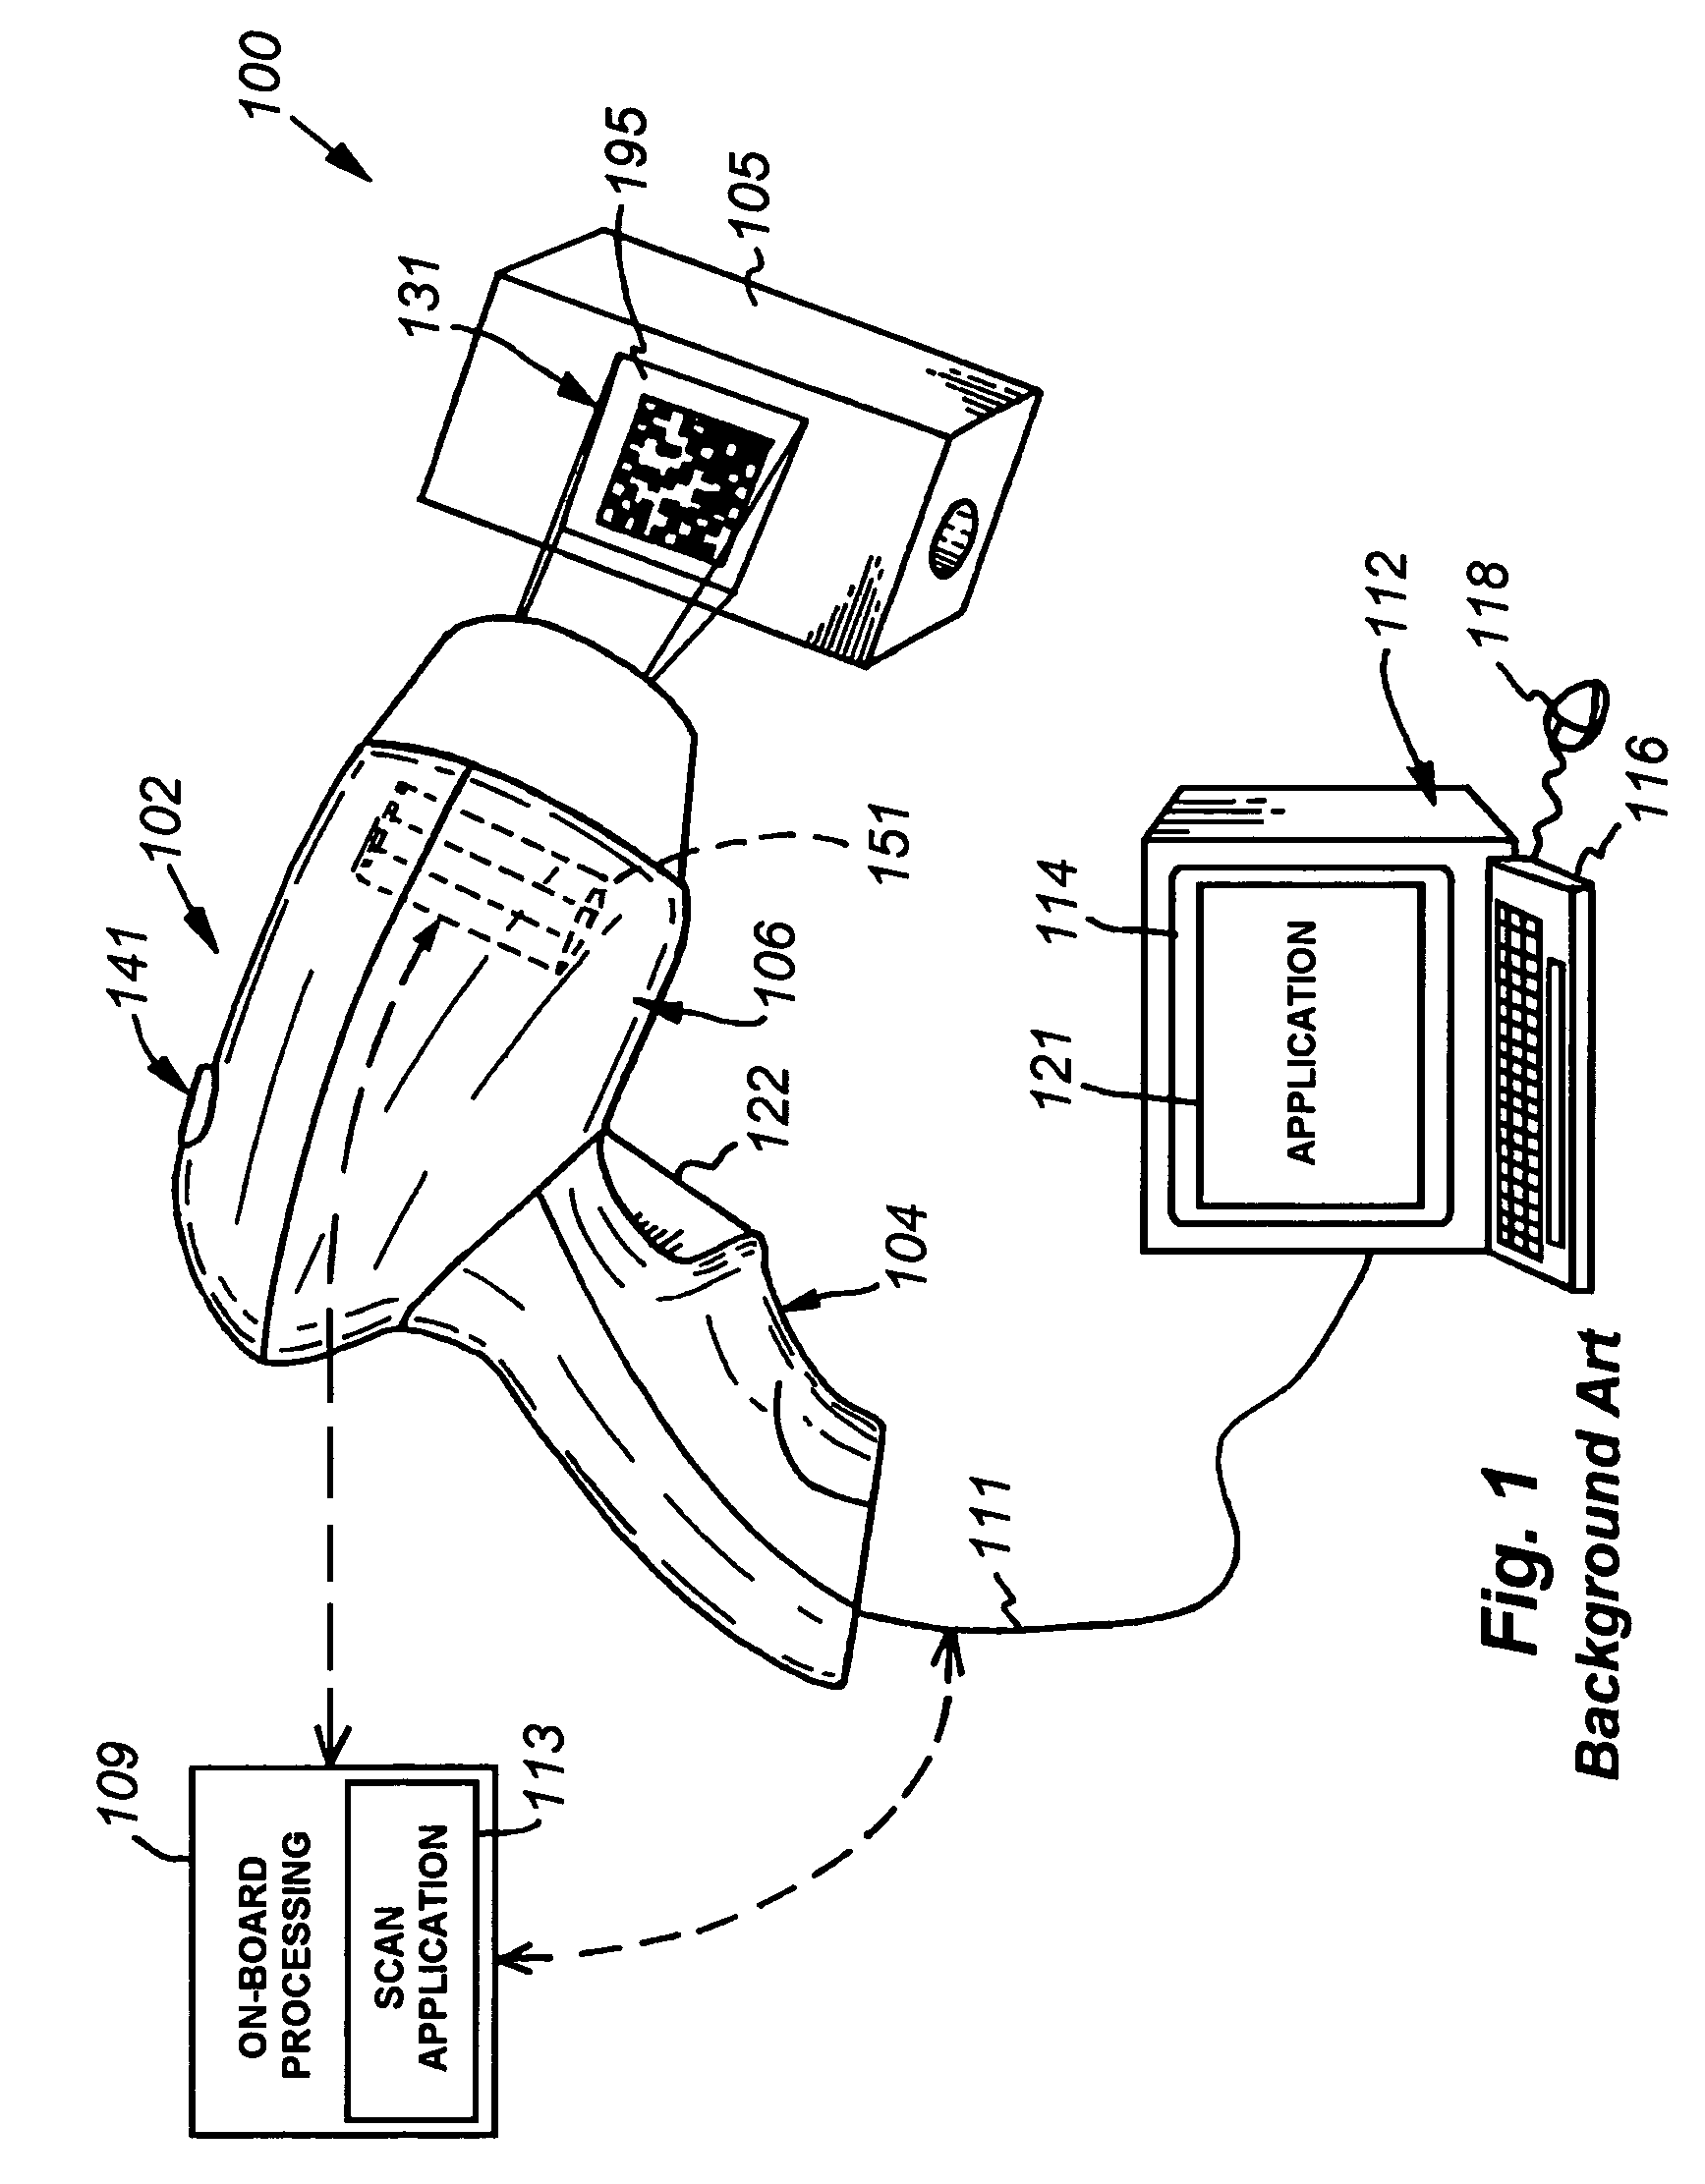 System and method for employing color illumination and color filtration in a symbology reader